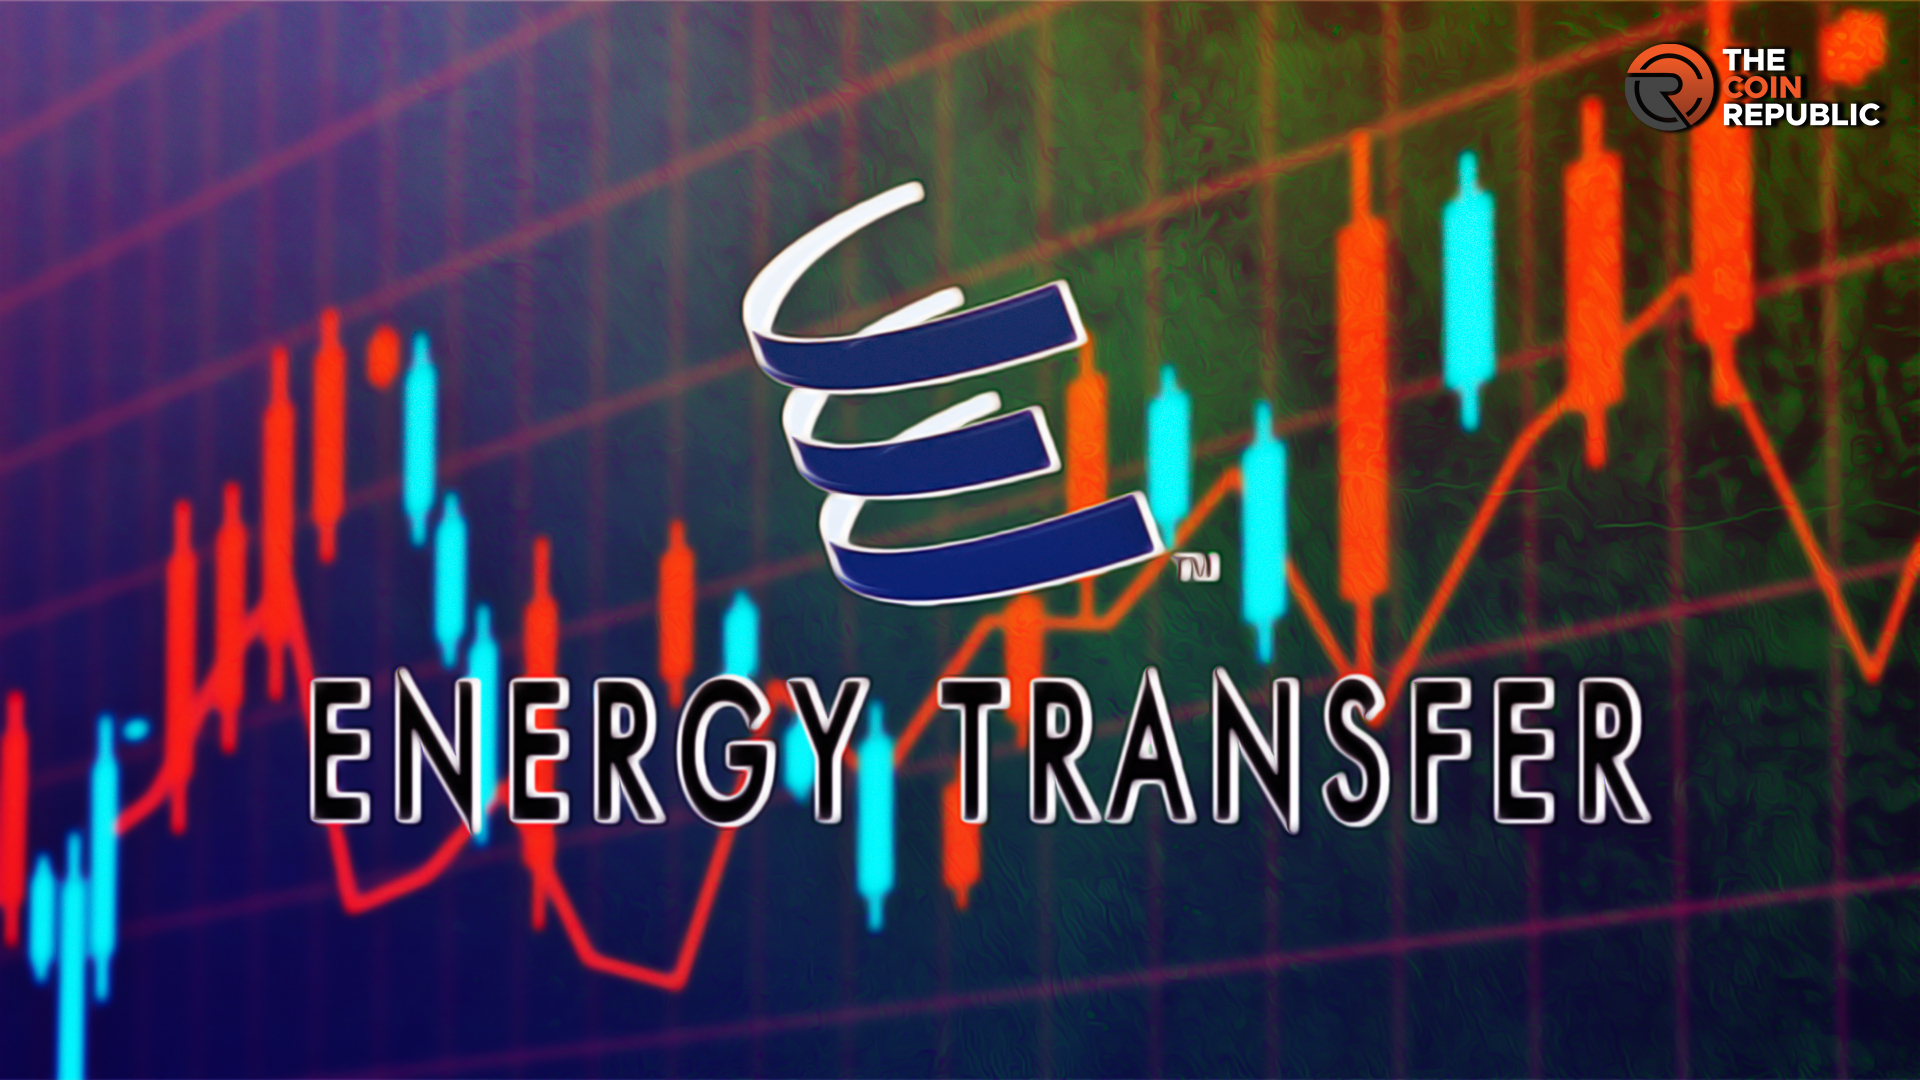 ET Stock Price Prediction: Can Energy Transfer Stock Gain More?